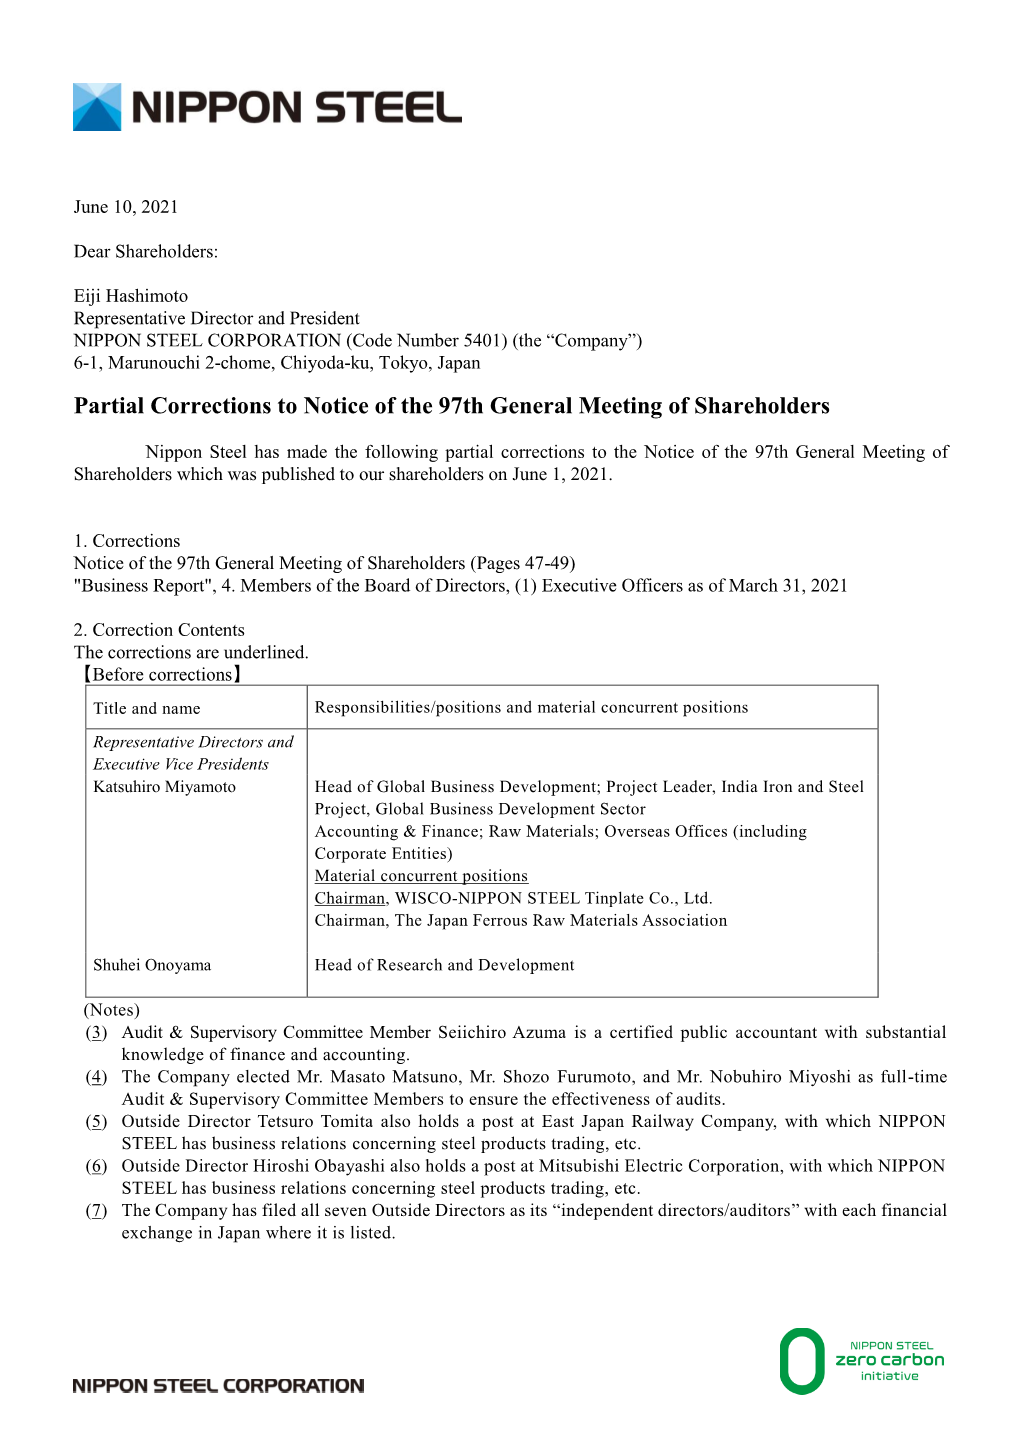 Partial Corrections to Notice of the 97Th General Meeting of Shareholders